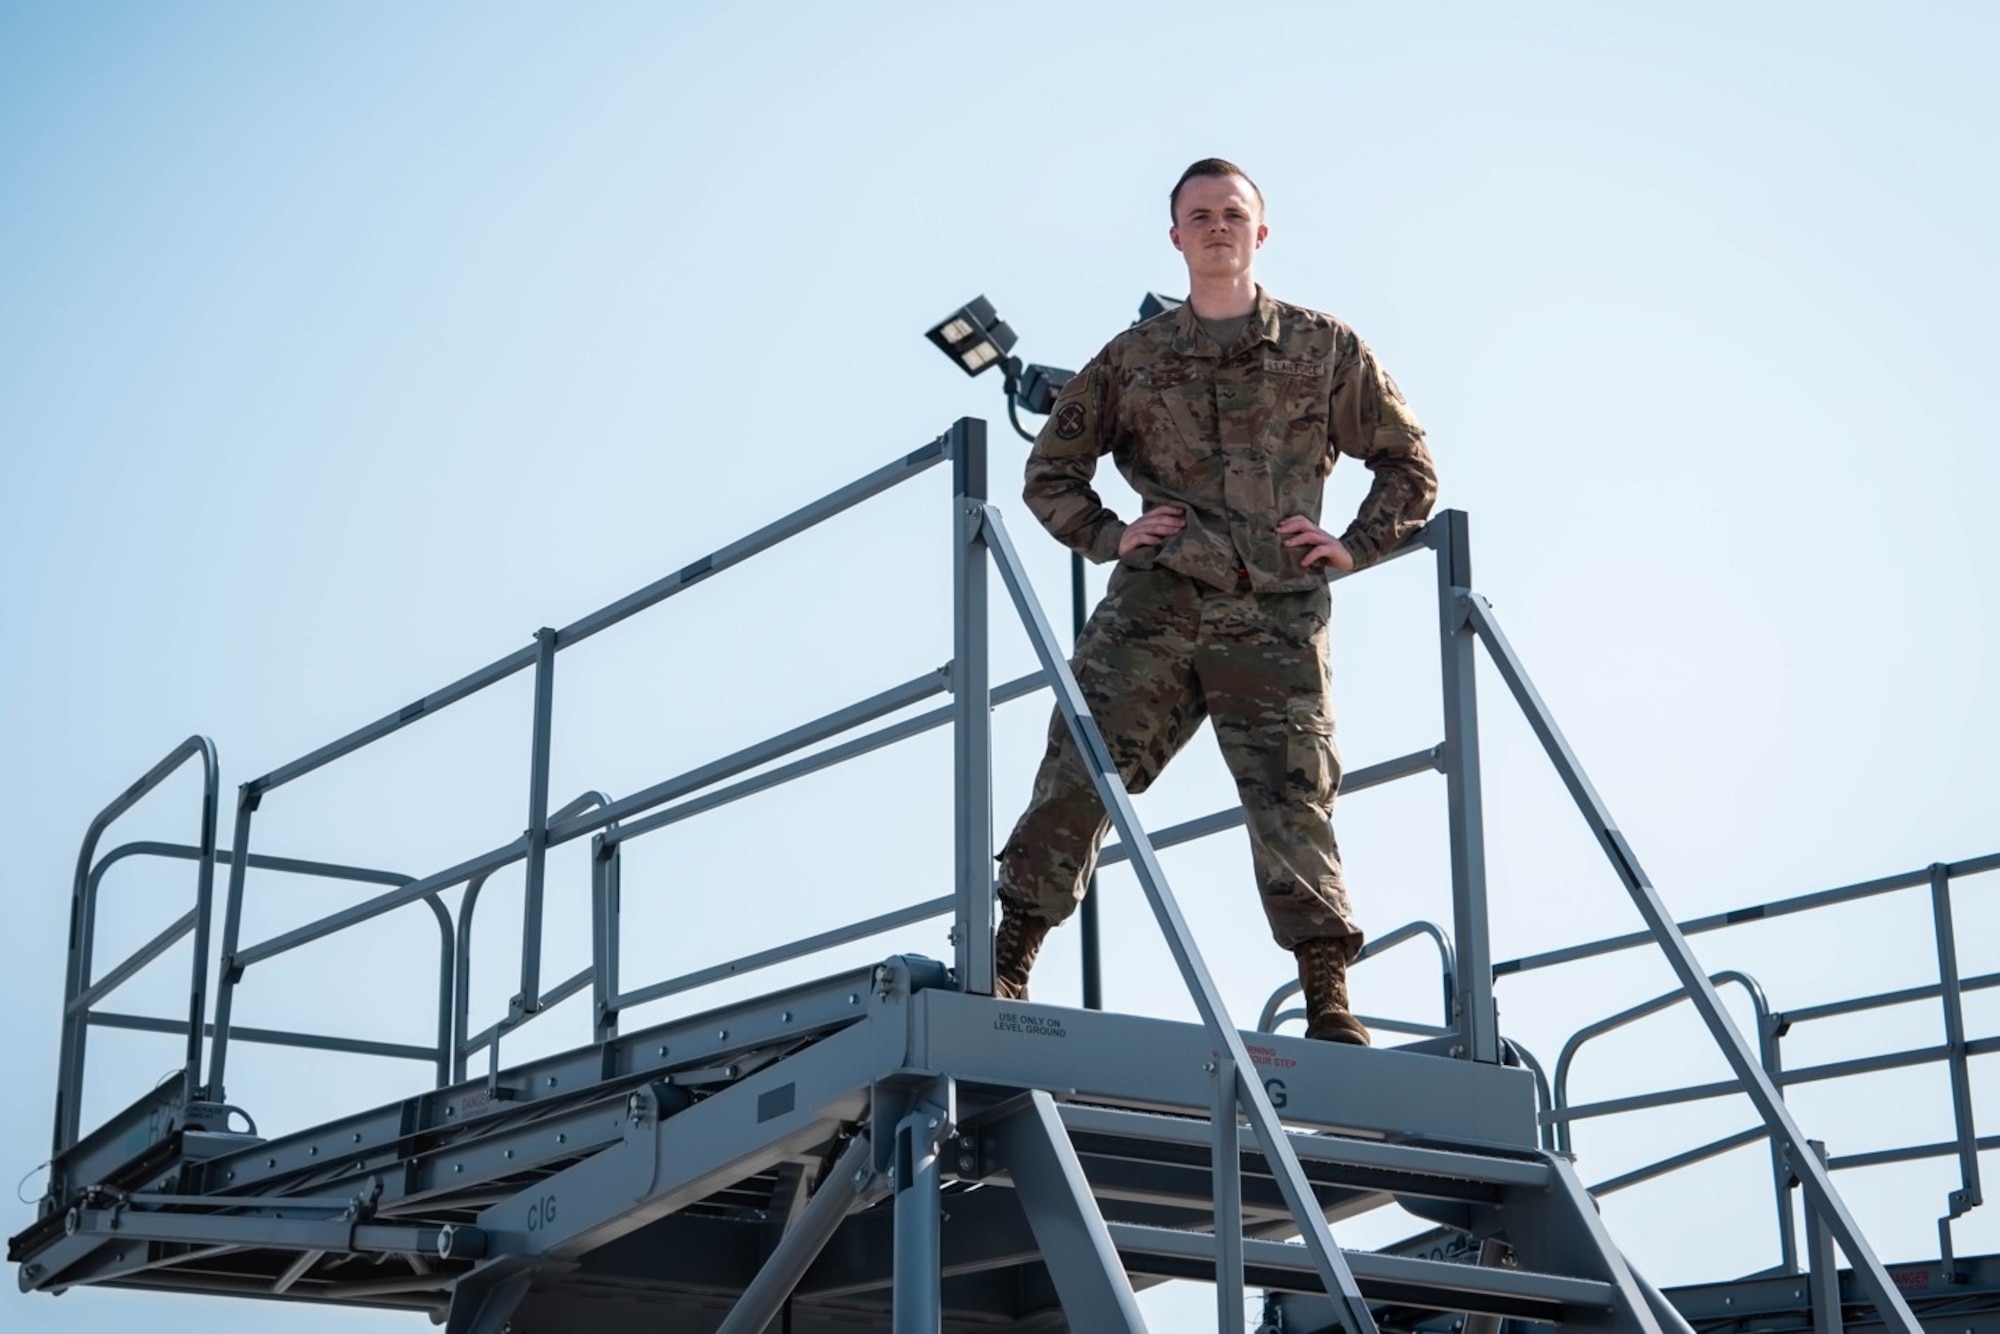 Senior Airman Joshua Wilson, 22nd Maintenance Squadron aerospace ground equipment journeyman, poses for a photo Aug. 10, 2021, at, McConnell Air Force Base, Kansas. Wilson has been selected as Air Mobility Command’s nominee for the 2021 United Service Organization Member of the Year Award, after helping save two lives while off-duty. (U.S. Air Force photo by Airman 1st Class Zachary Willis)